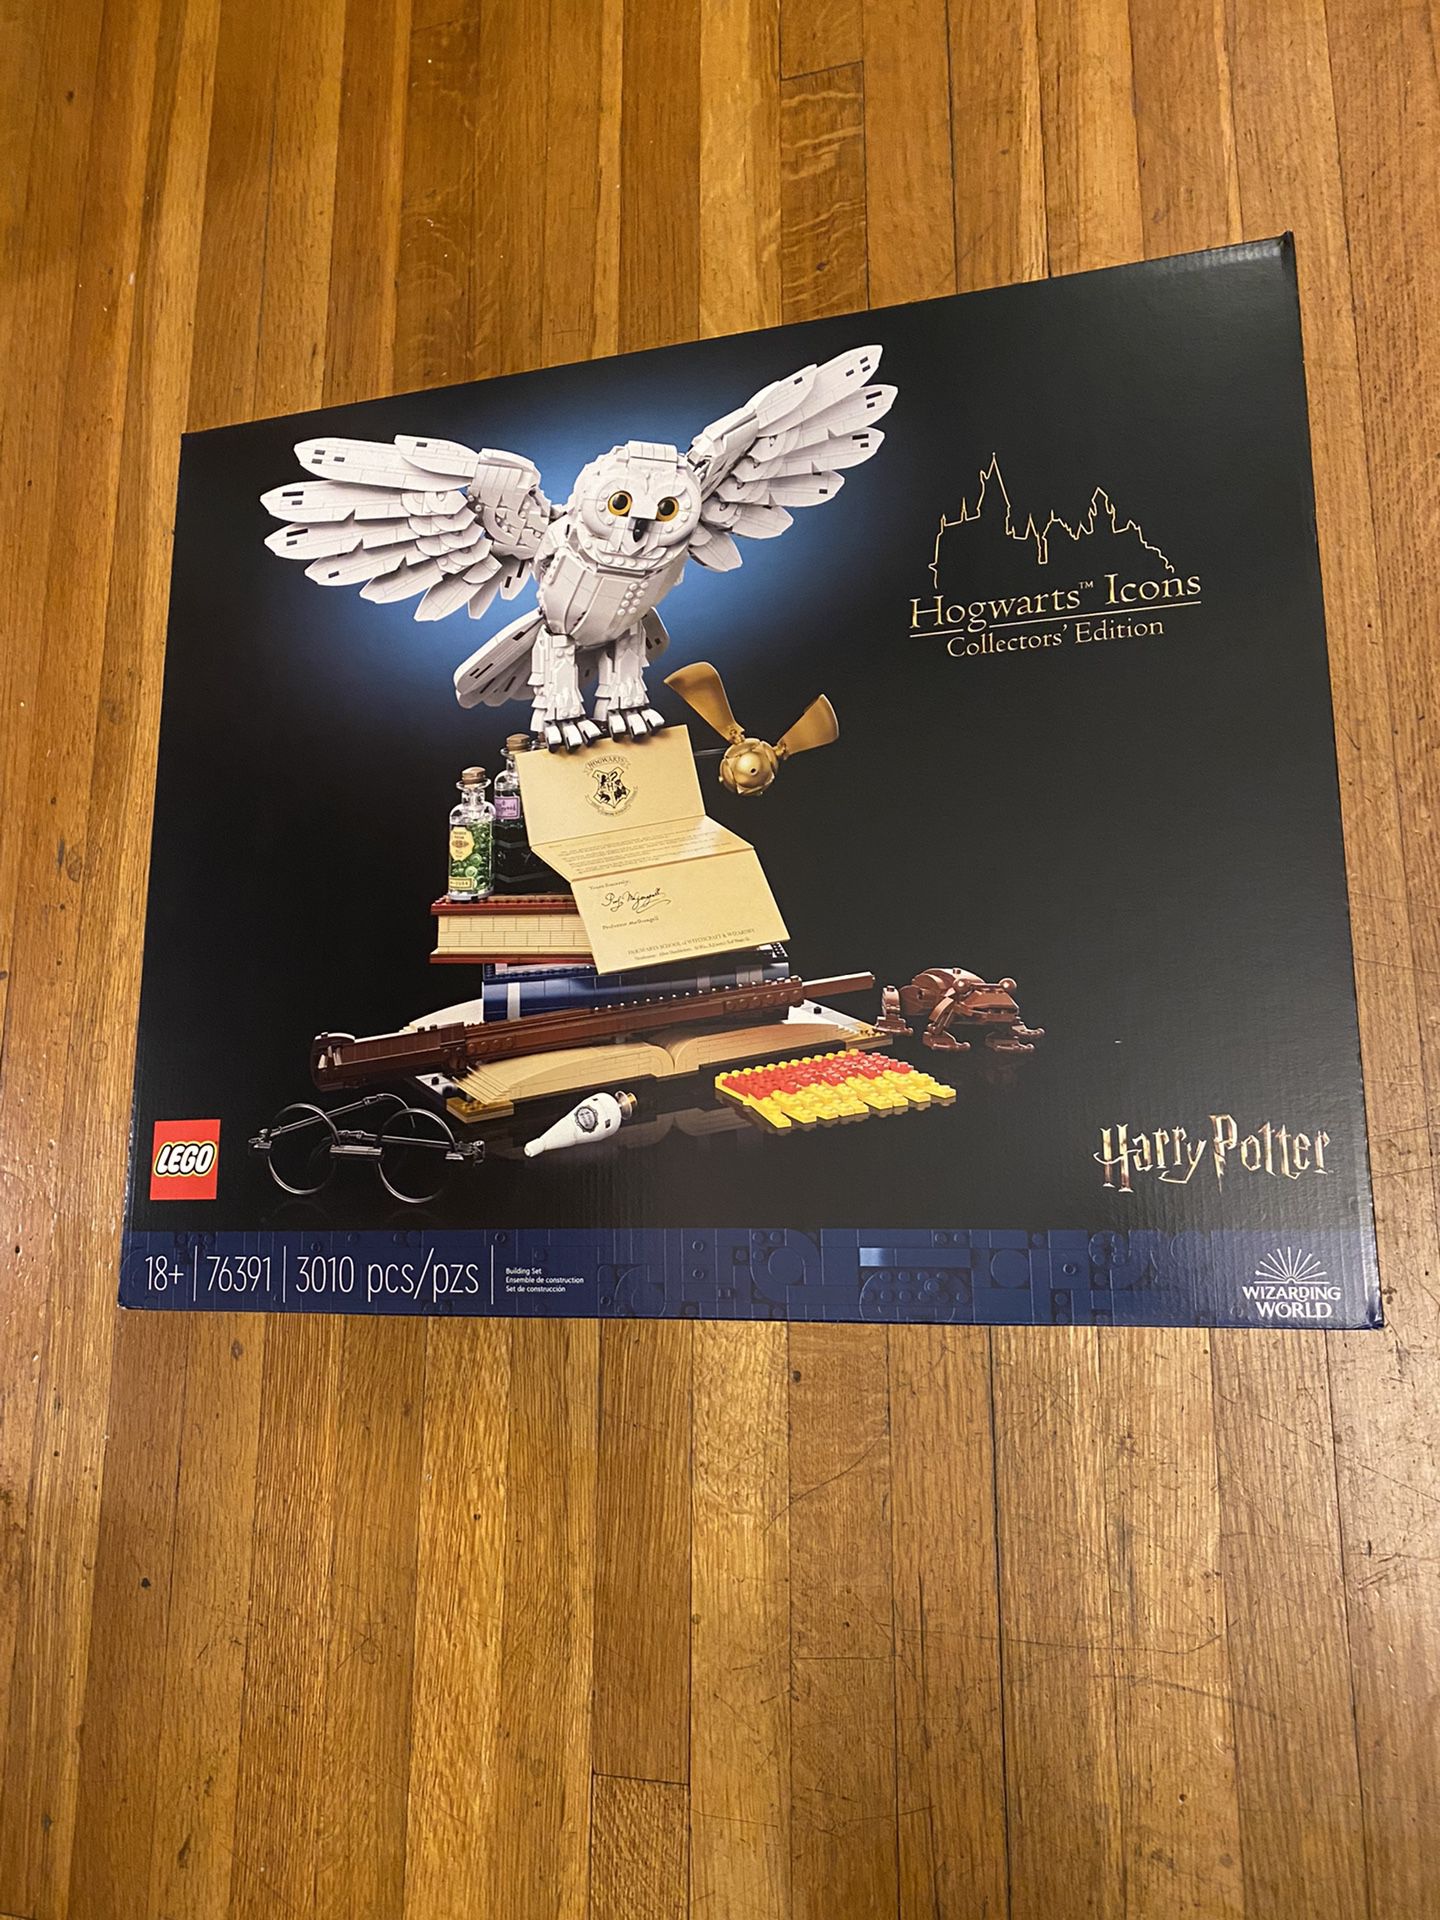 LEGO Harry Potter Hogwarts Icons (76391) Collectors’ Edition Brand New